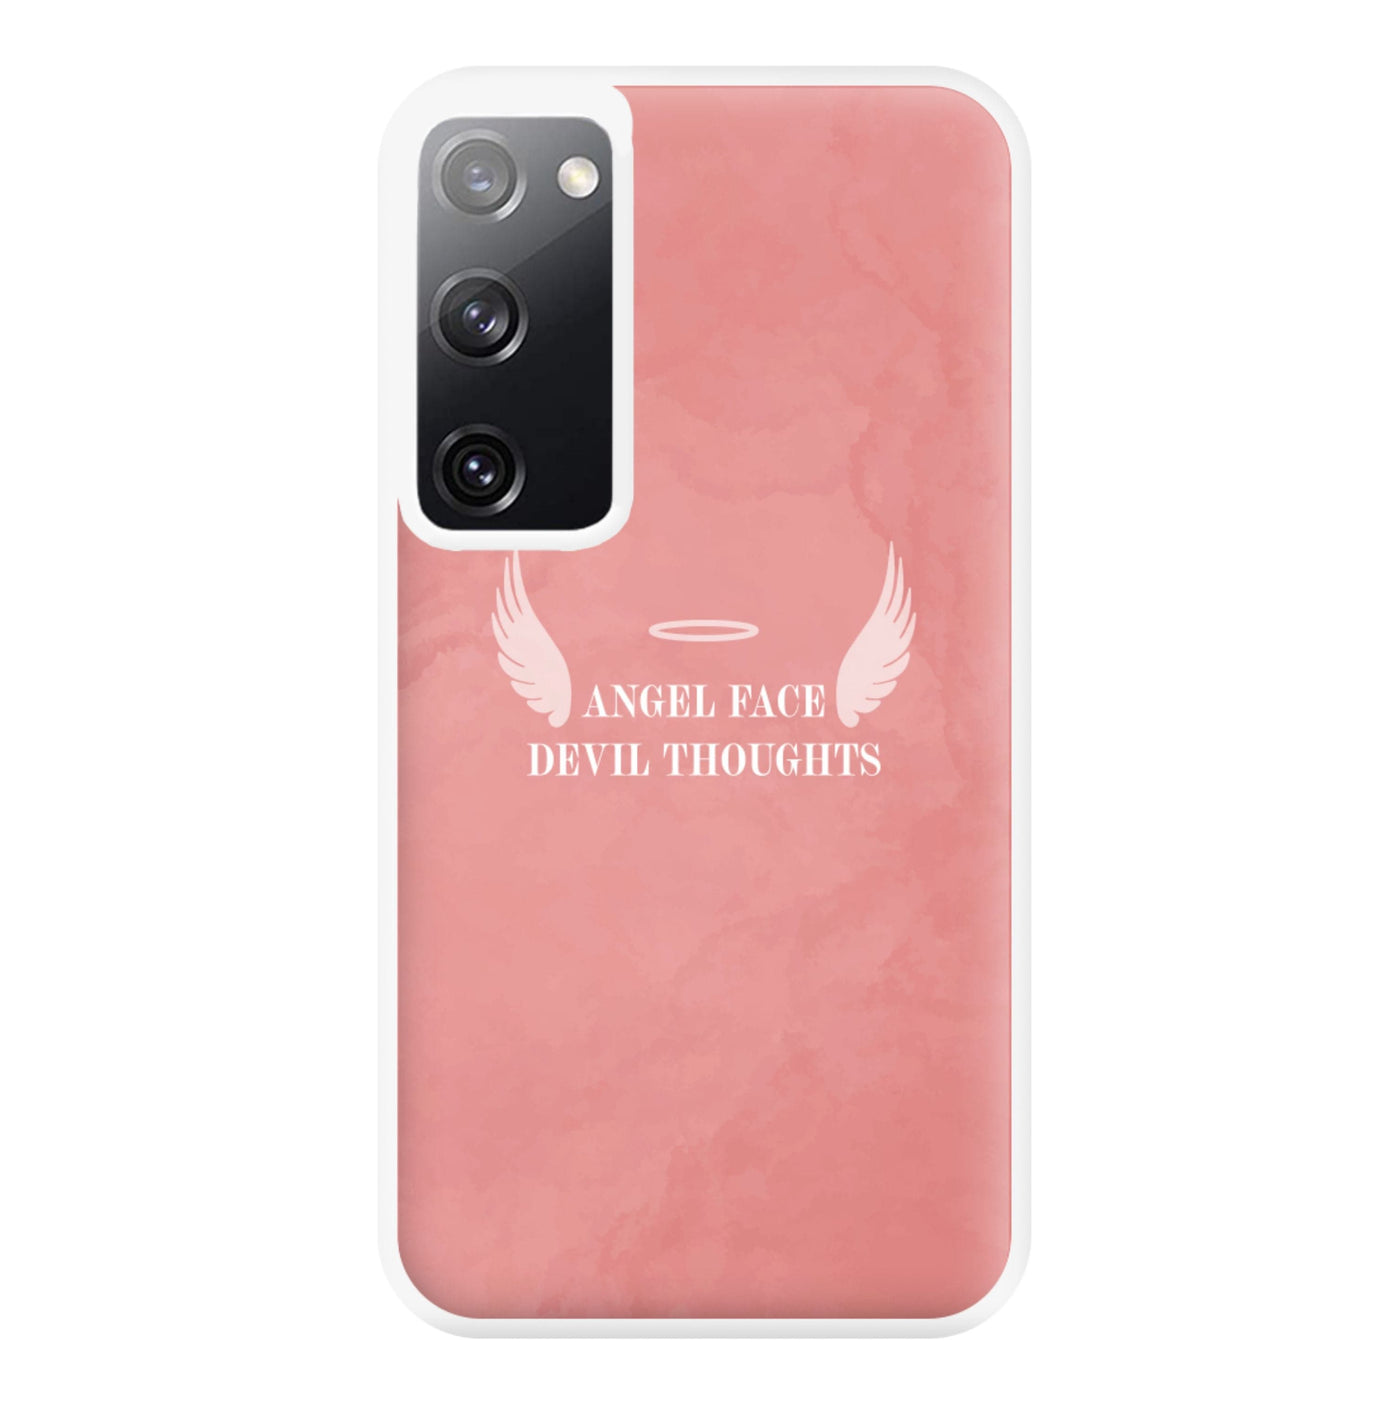 Angel Face Devil Thoughts Phone Case